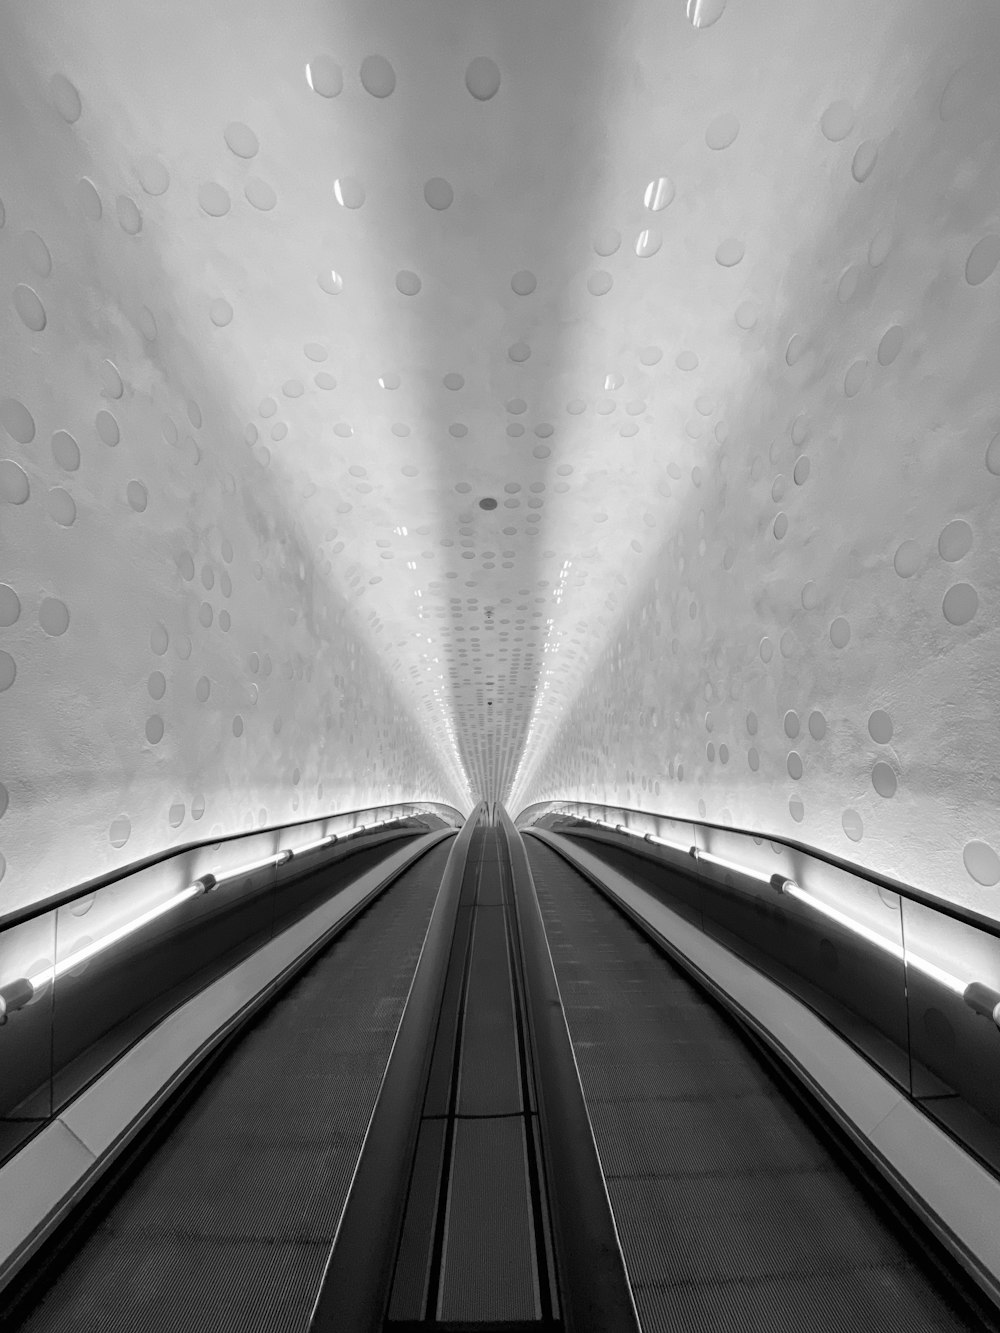 grayscale photo of tunnel with water droplets